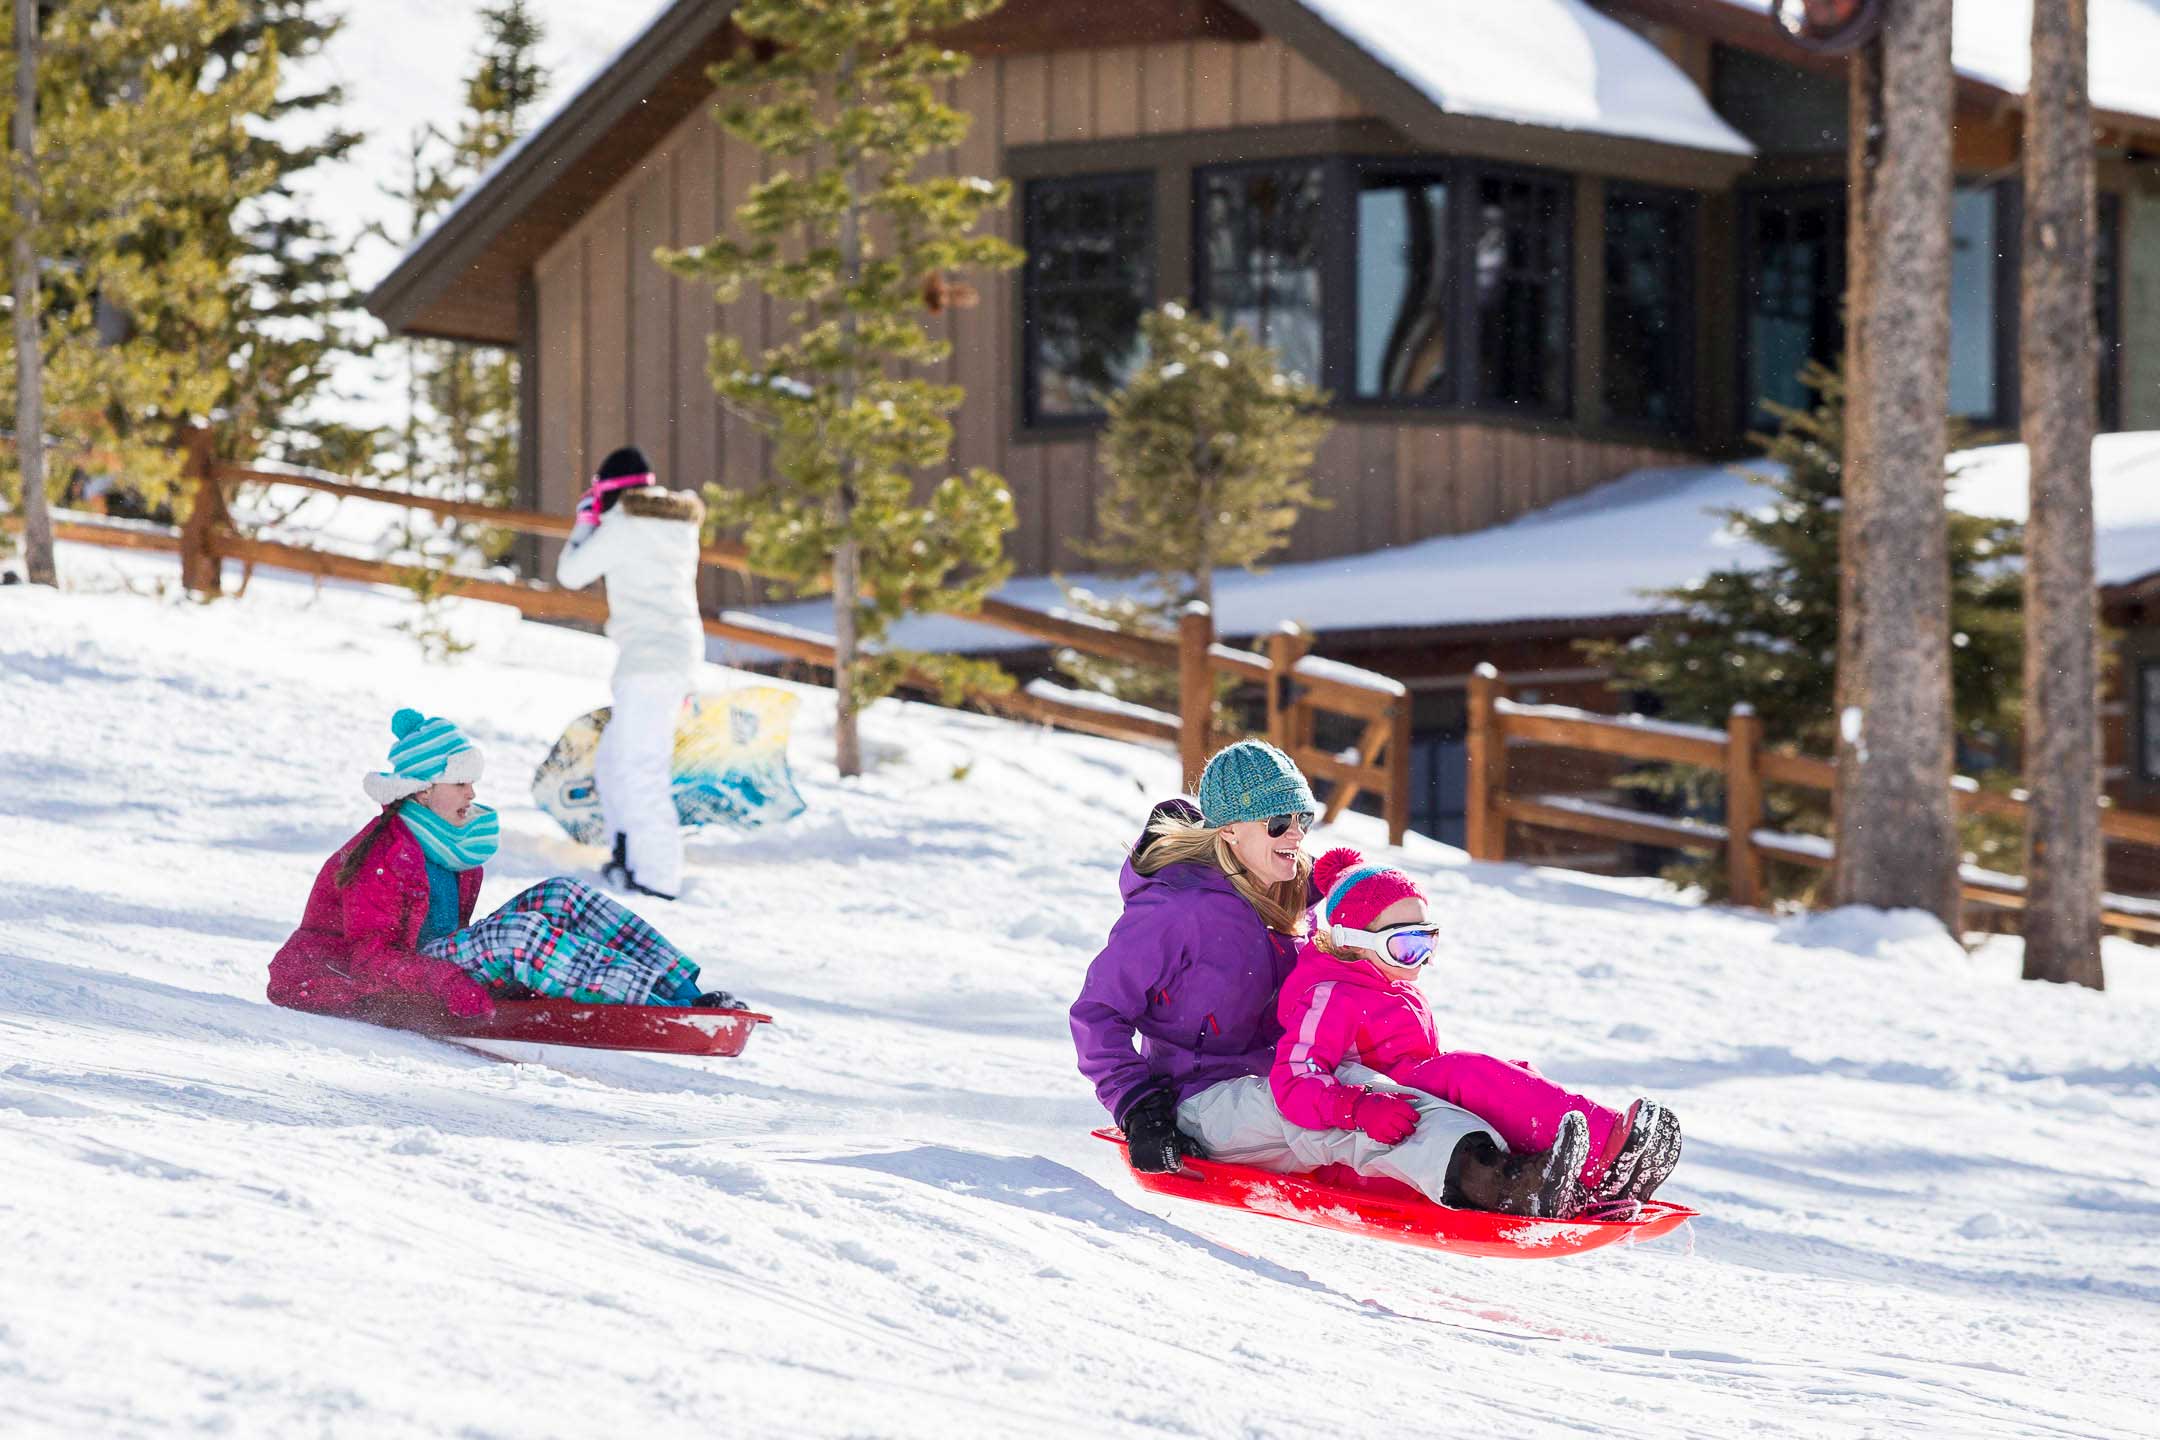 See These Ideas for Winter Family Vacation on a Budget